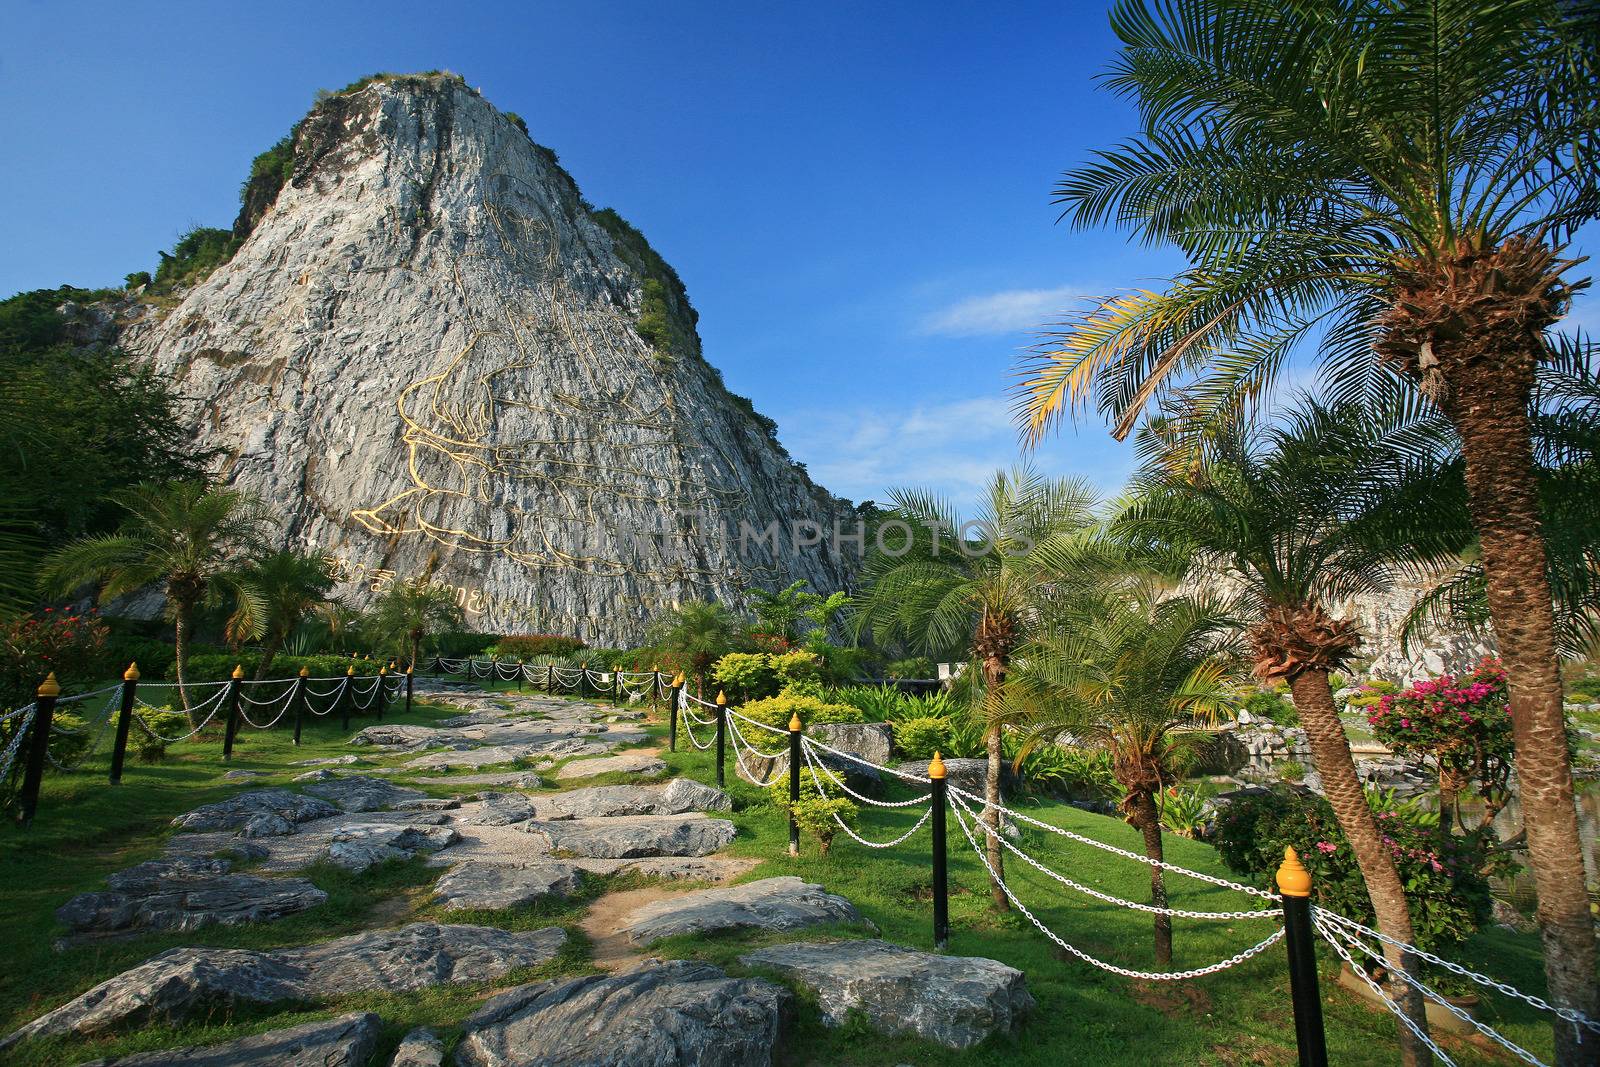 Carved buddha image on the cliff at Khao Chee Jan, Pattaya, Thai by think4photop